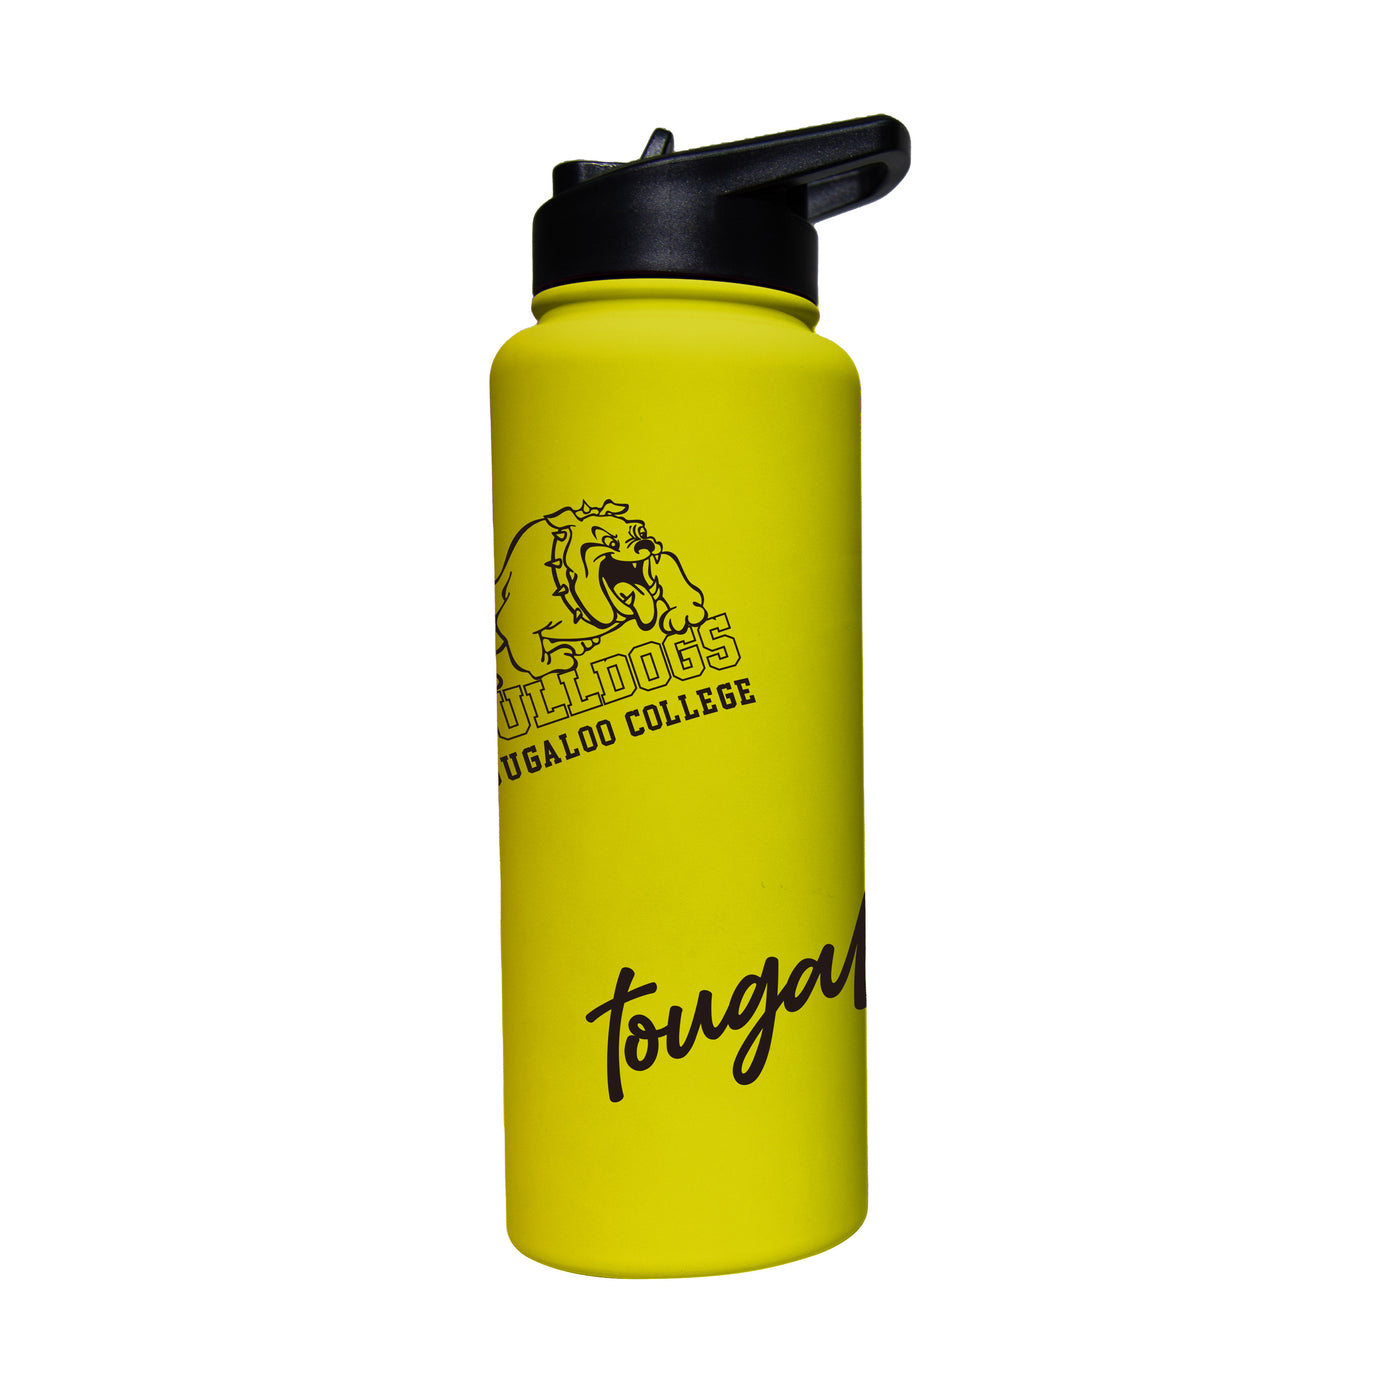 Tougaloo College 34oz Cru Bold Soft Touch Quencher